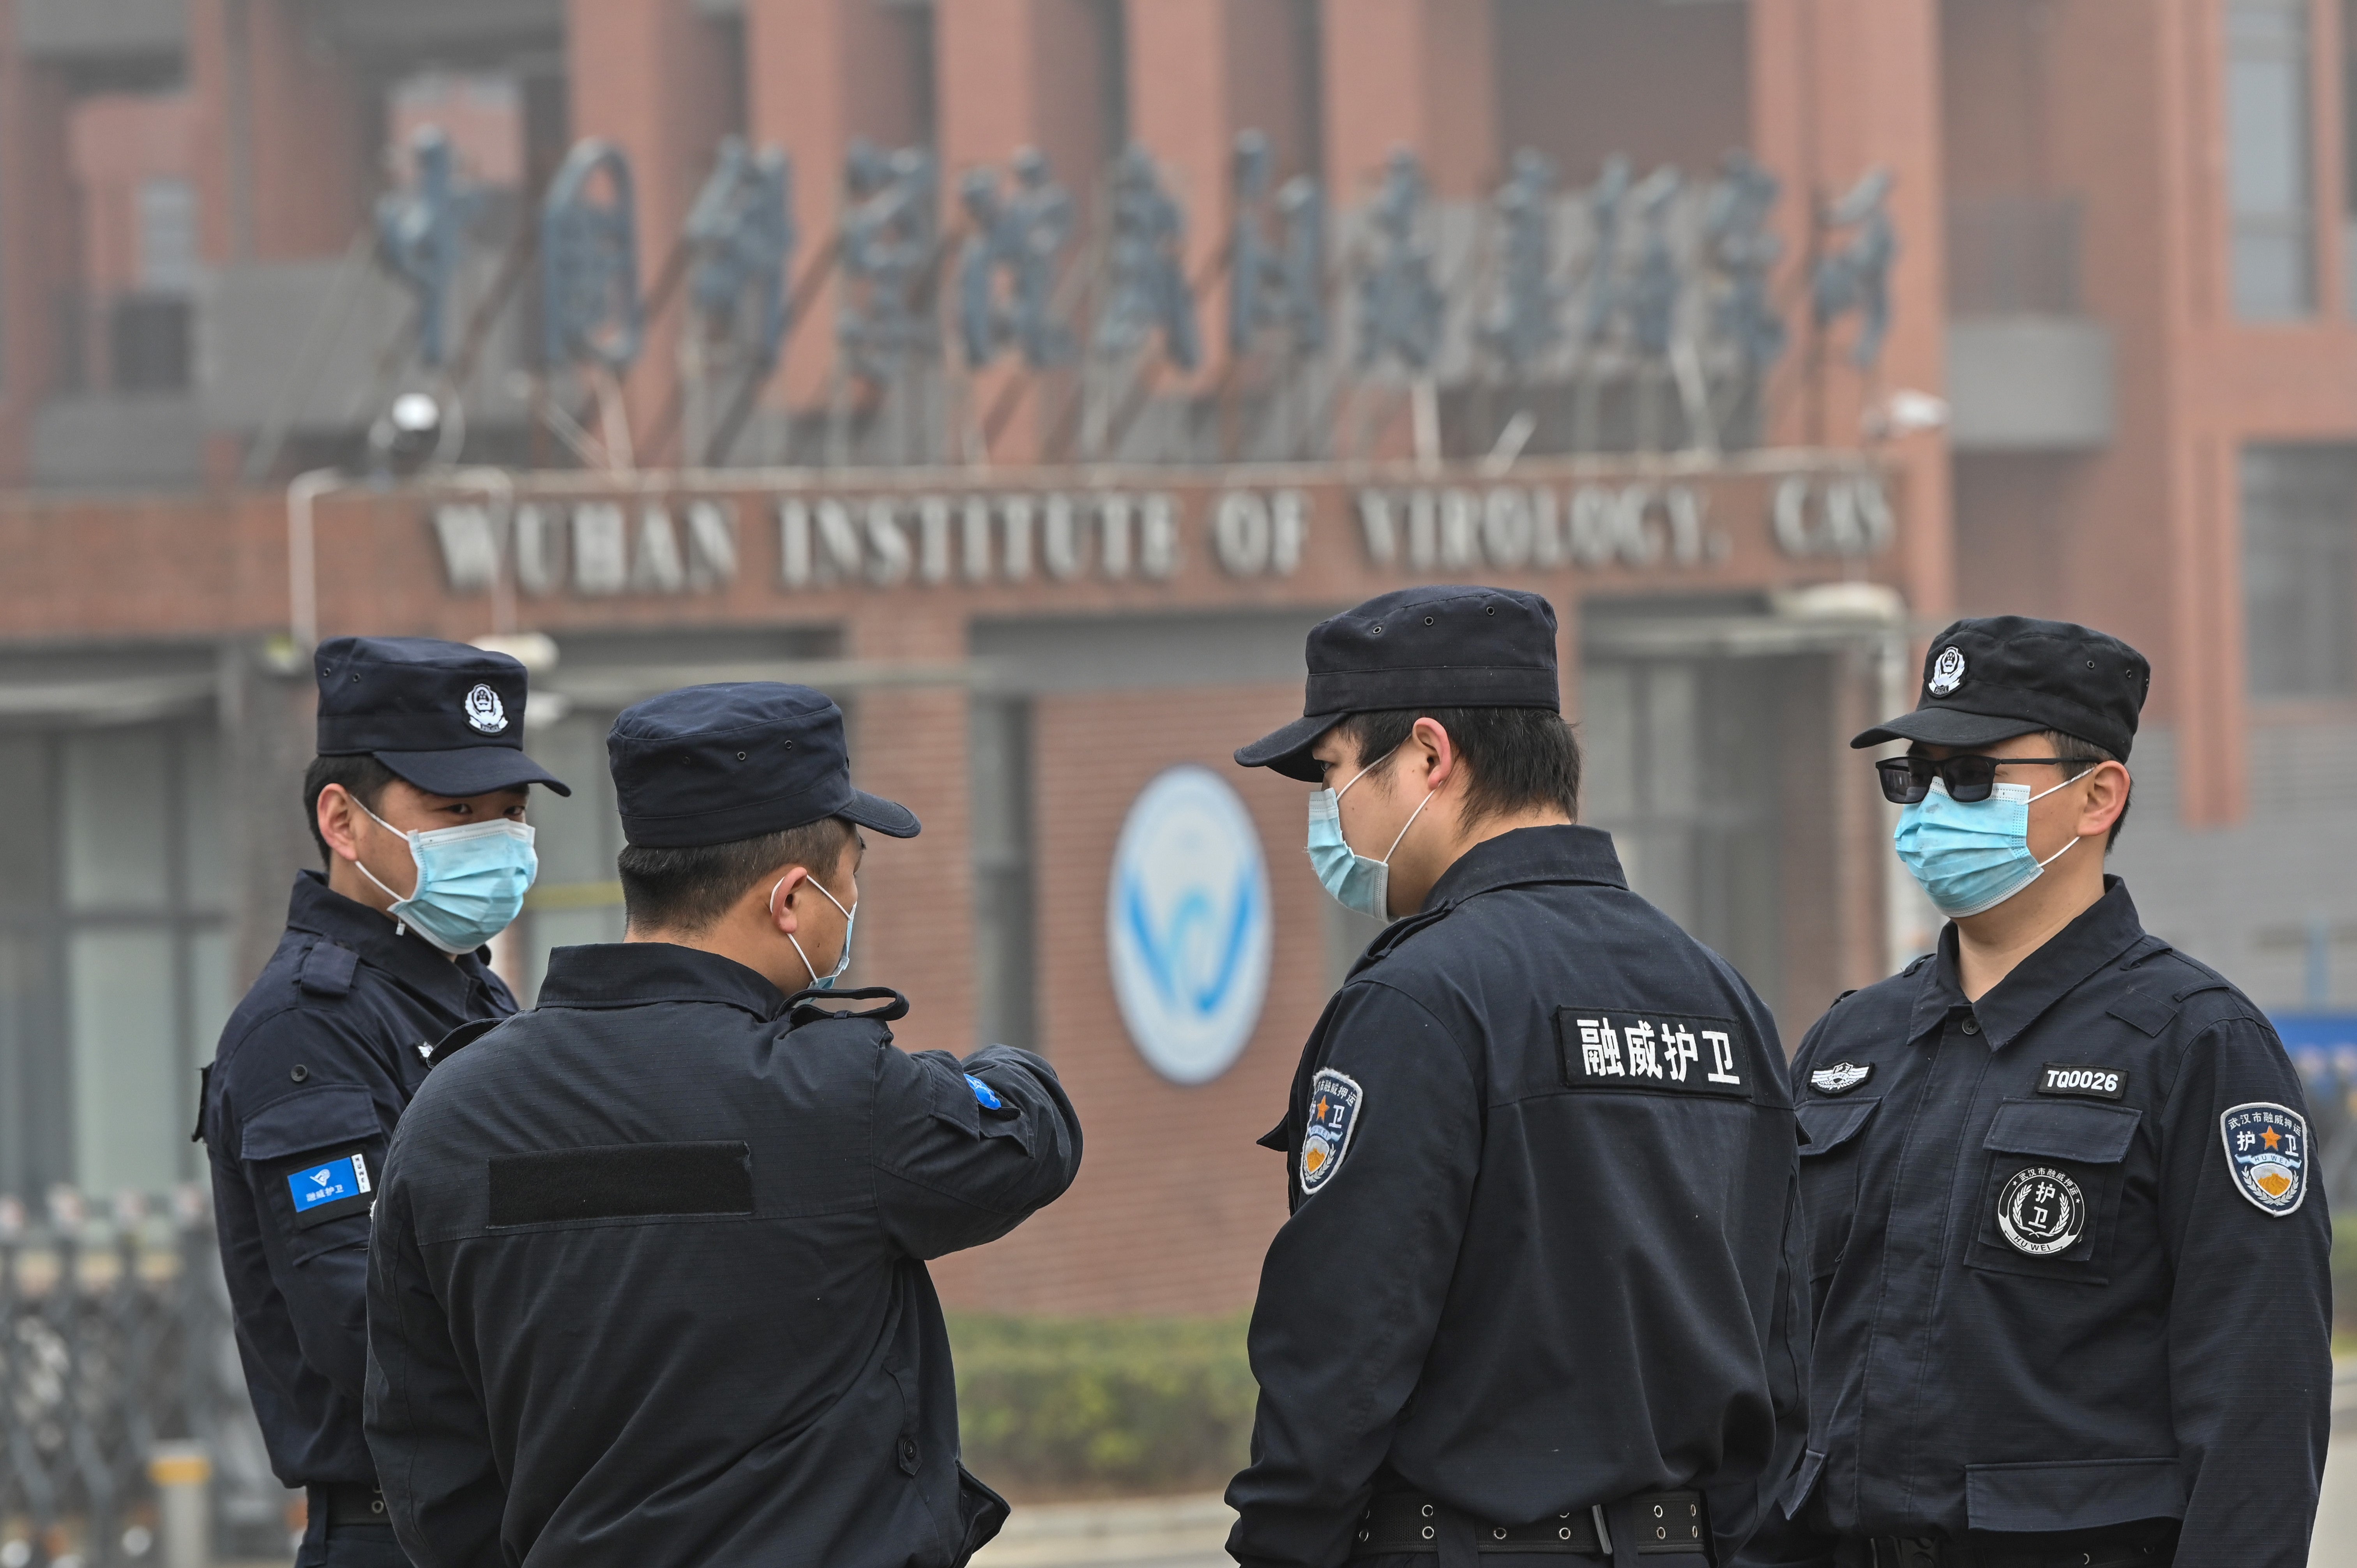 <p>Security personnel stand guard outside the Wuhan Institute of Virology in Wuhan as members of the World Health Organization (WHO) team investigating the origins of the COVID-19 coronavirus make a visit</p>